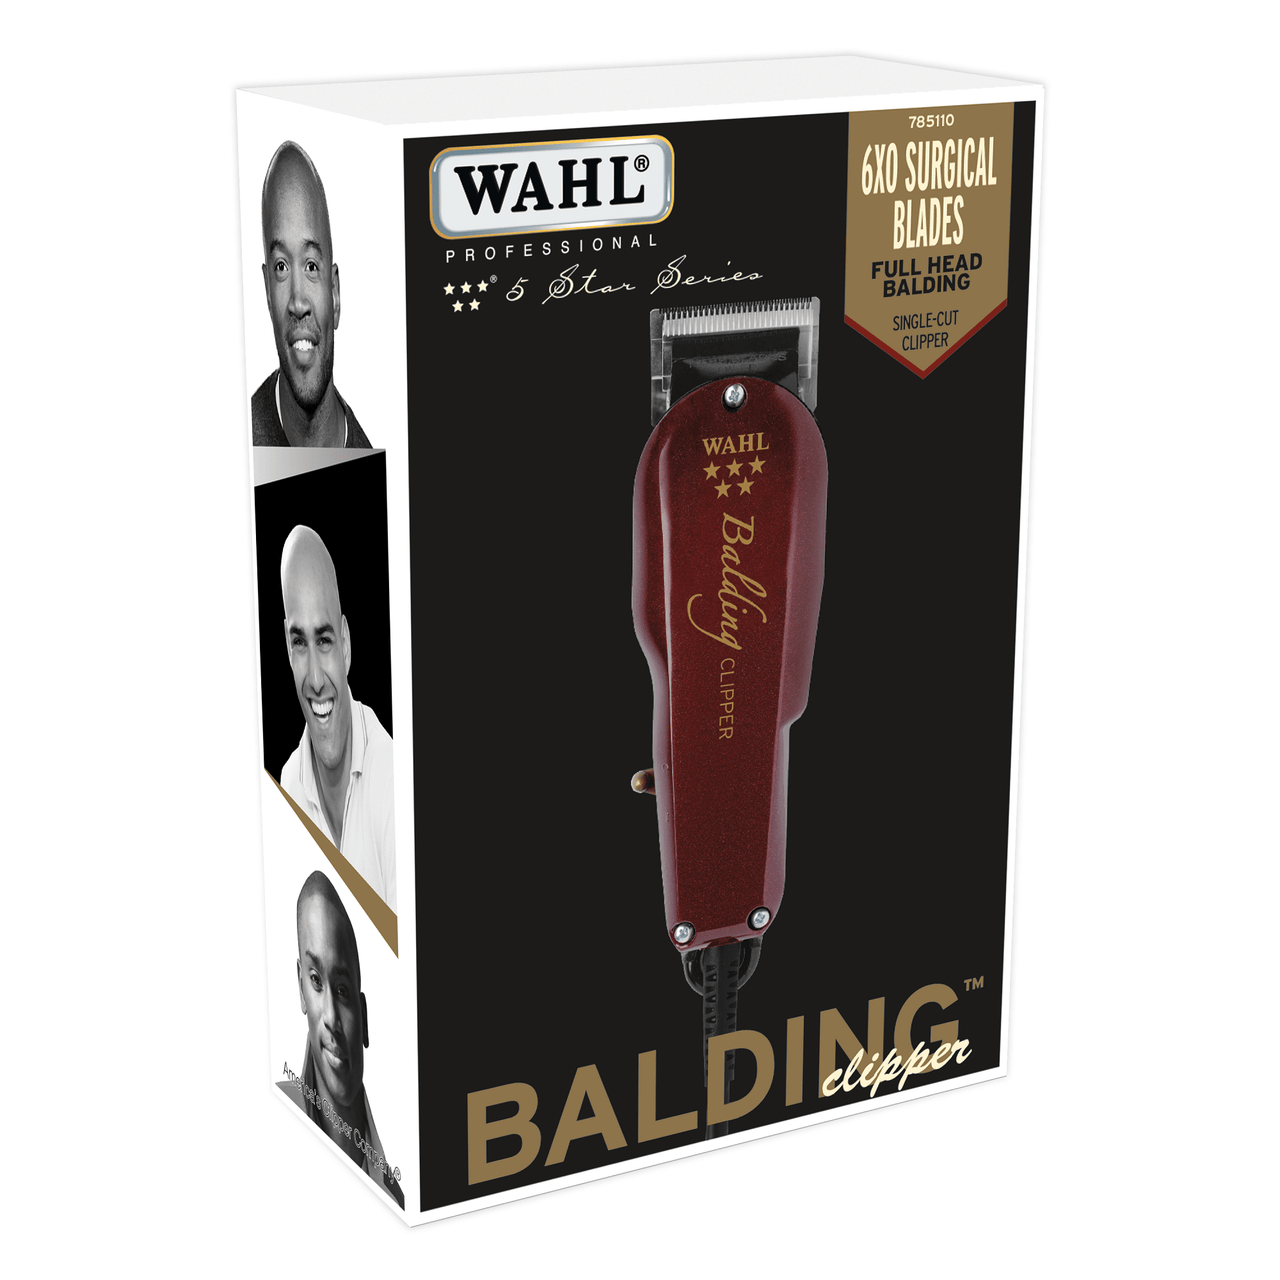 WAHL PROFESSIONAL_Balding Clipper_Cosmetic World